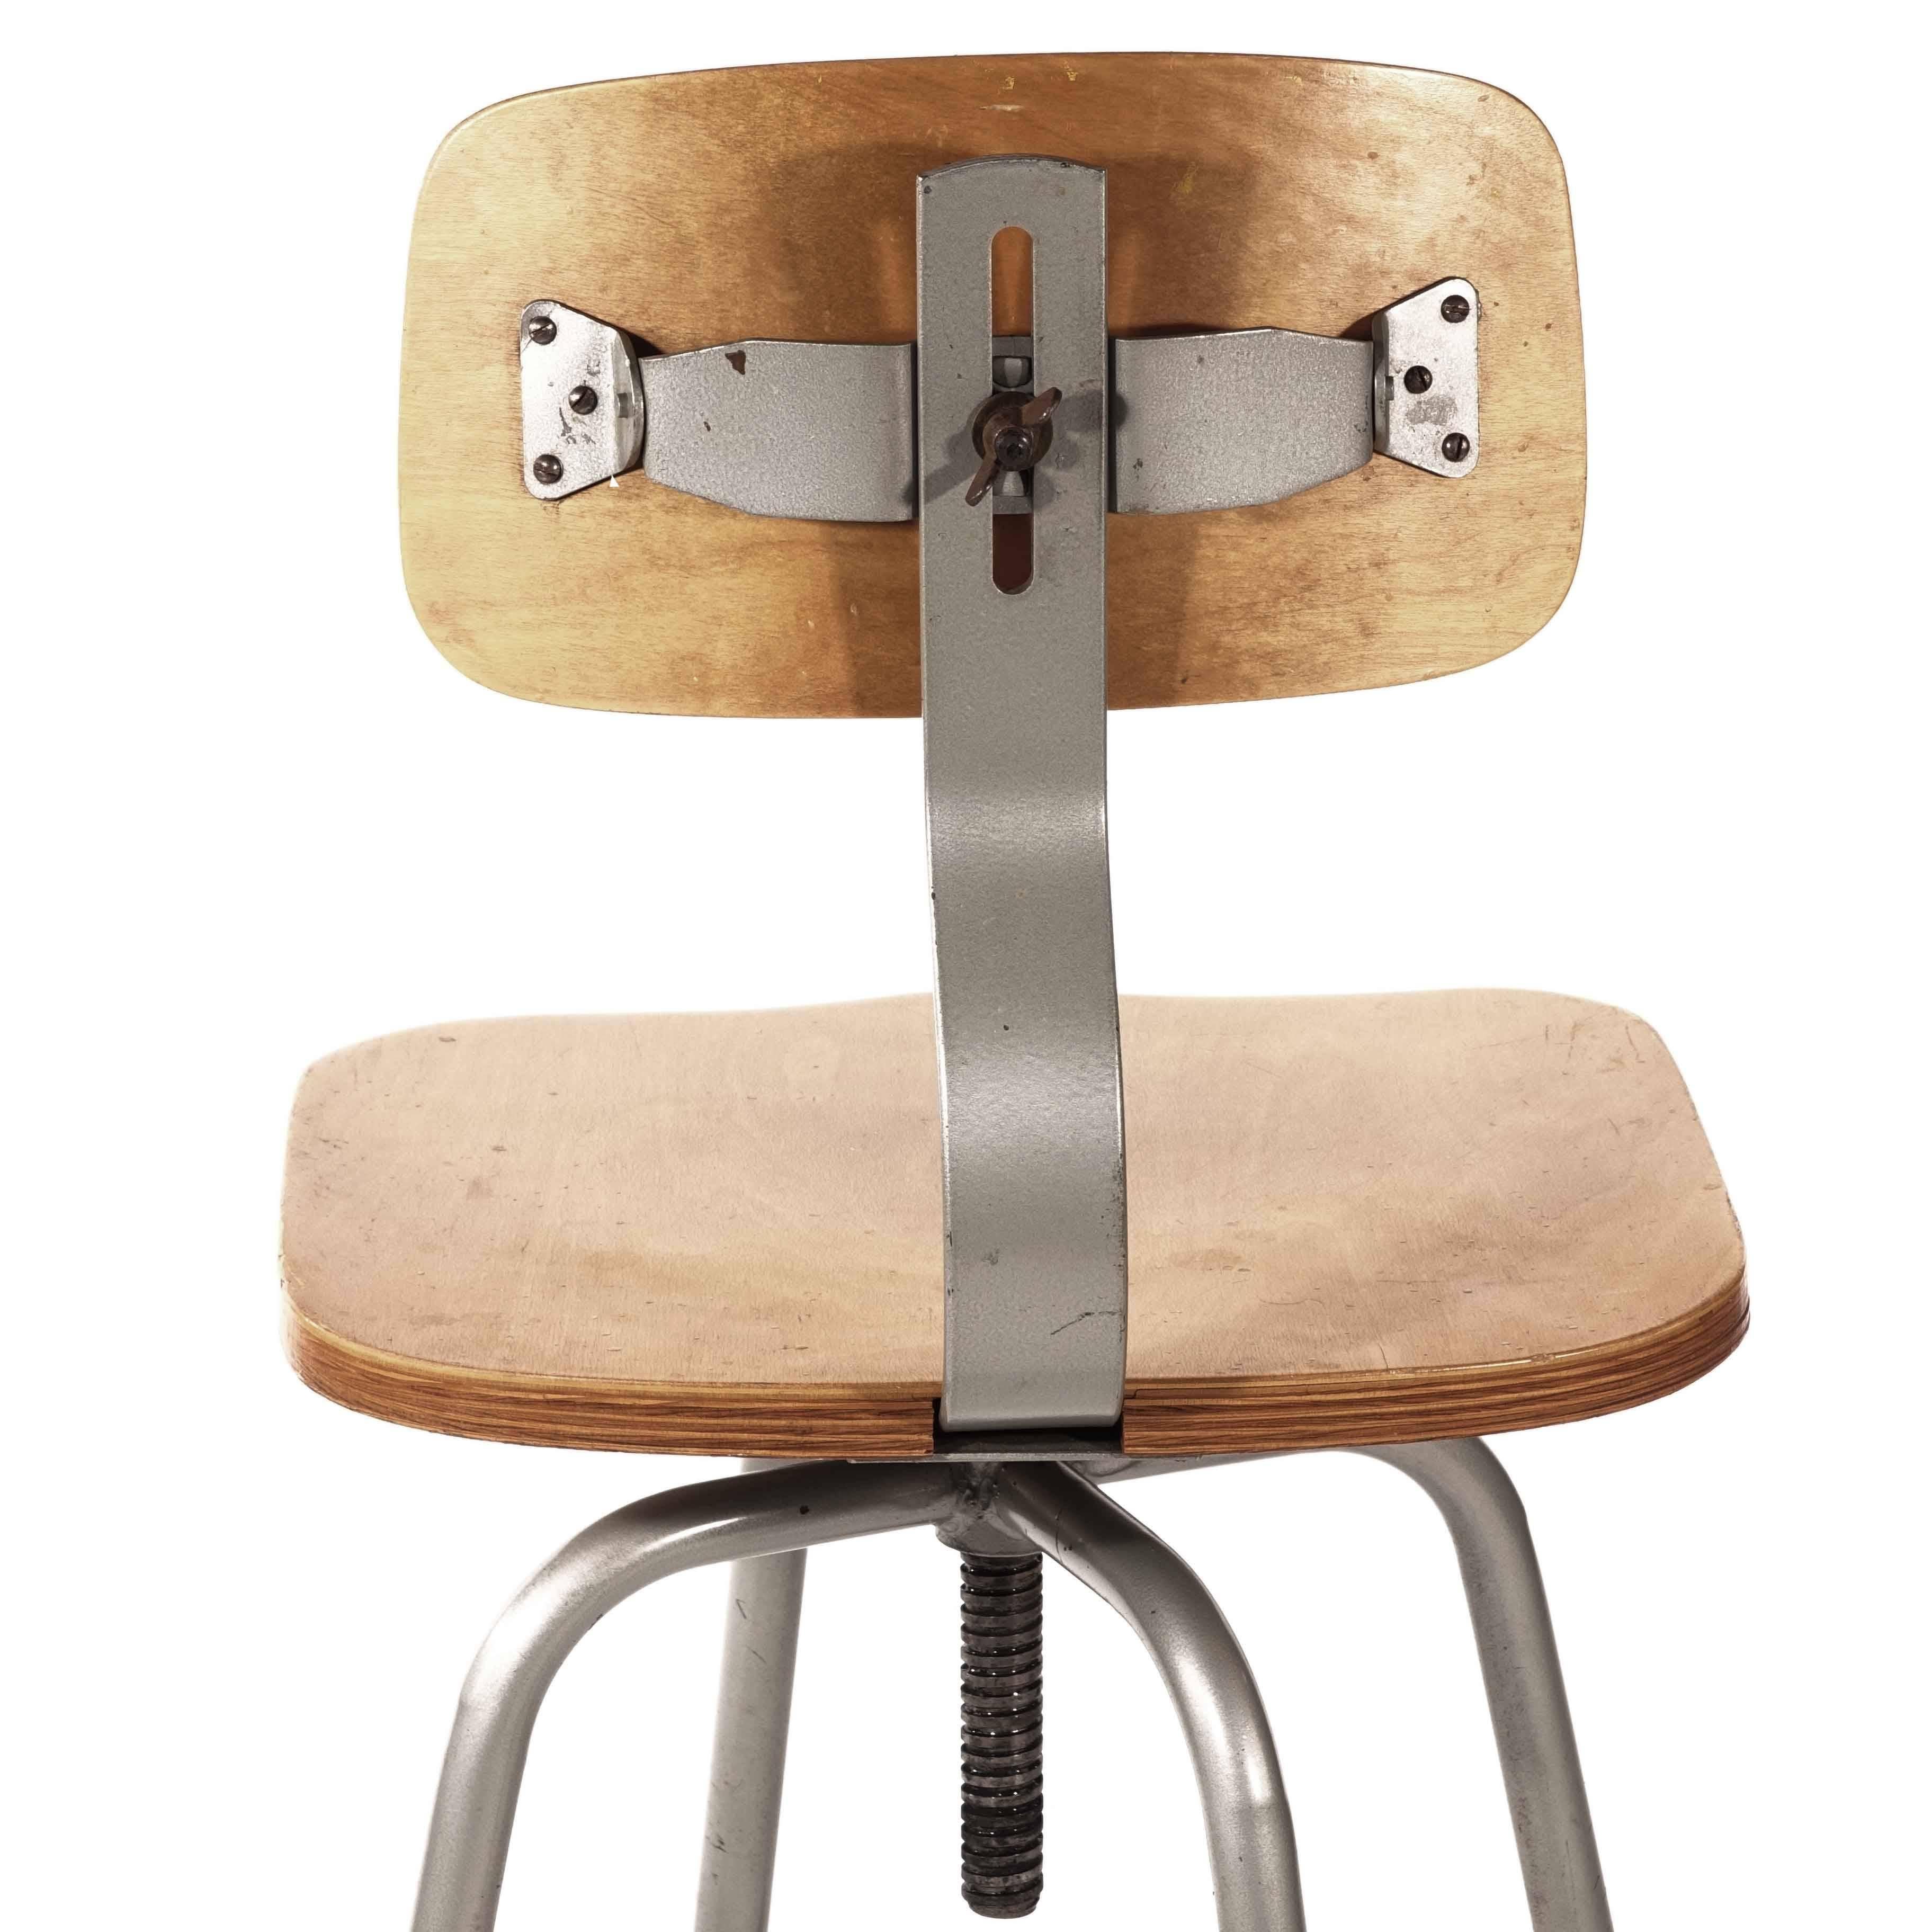 Industrial chair, Sweden, 1940-1950, molded seat and back made of wood, steel frame with adjustable height of the seat, this type of chair was common at the machines in the Swedish metal industry during the 1900s.
 